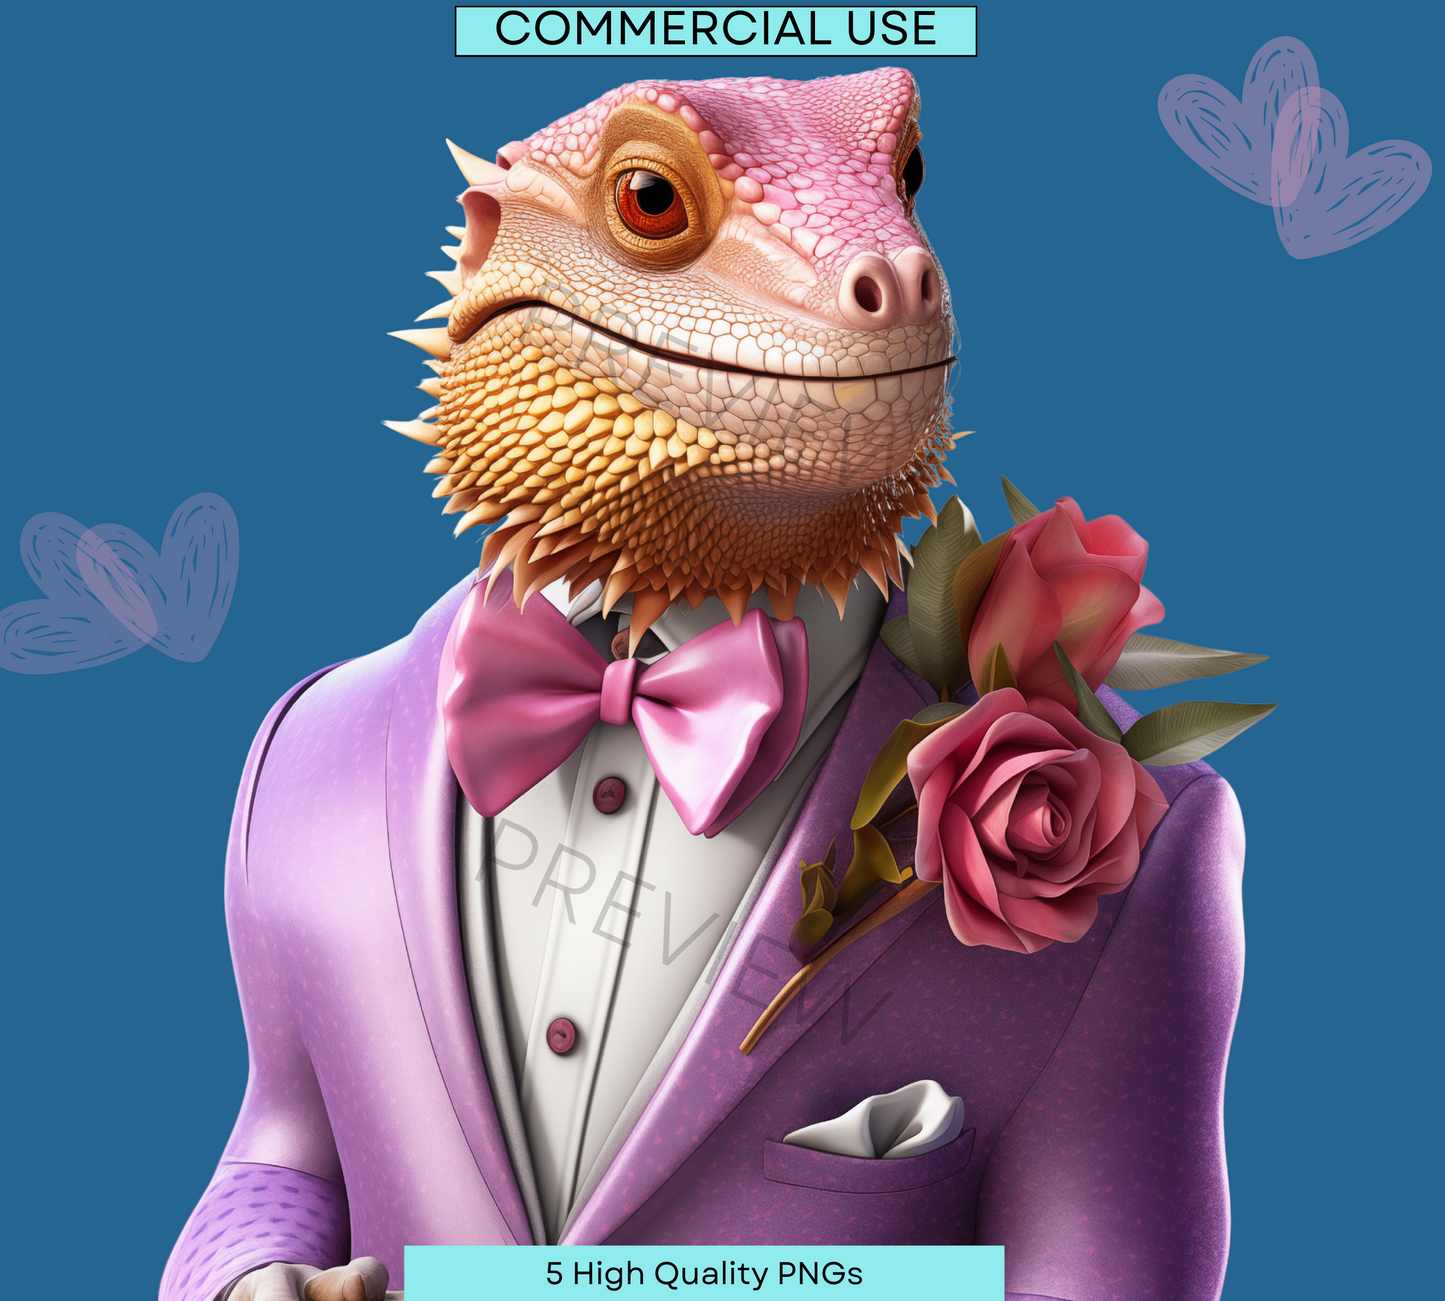 Bearded Dragon PNGs | Lizard Love | Cute Animals in Suits Clip art | Instant Download  | Valentines Clipart  | Commercial Use